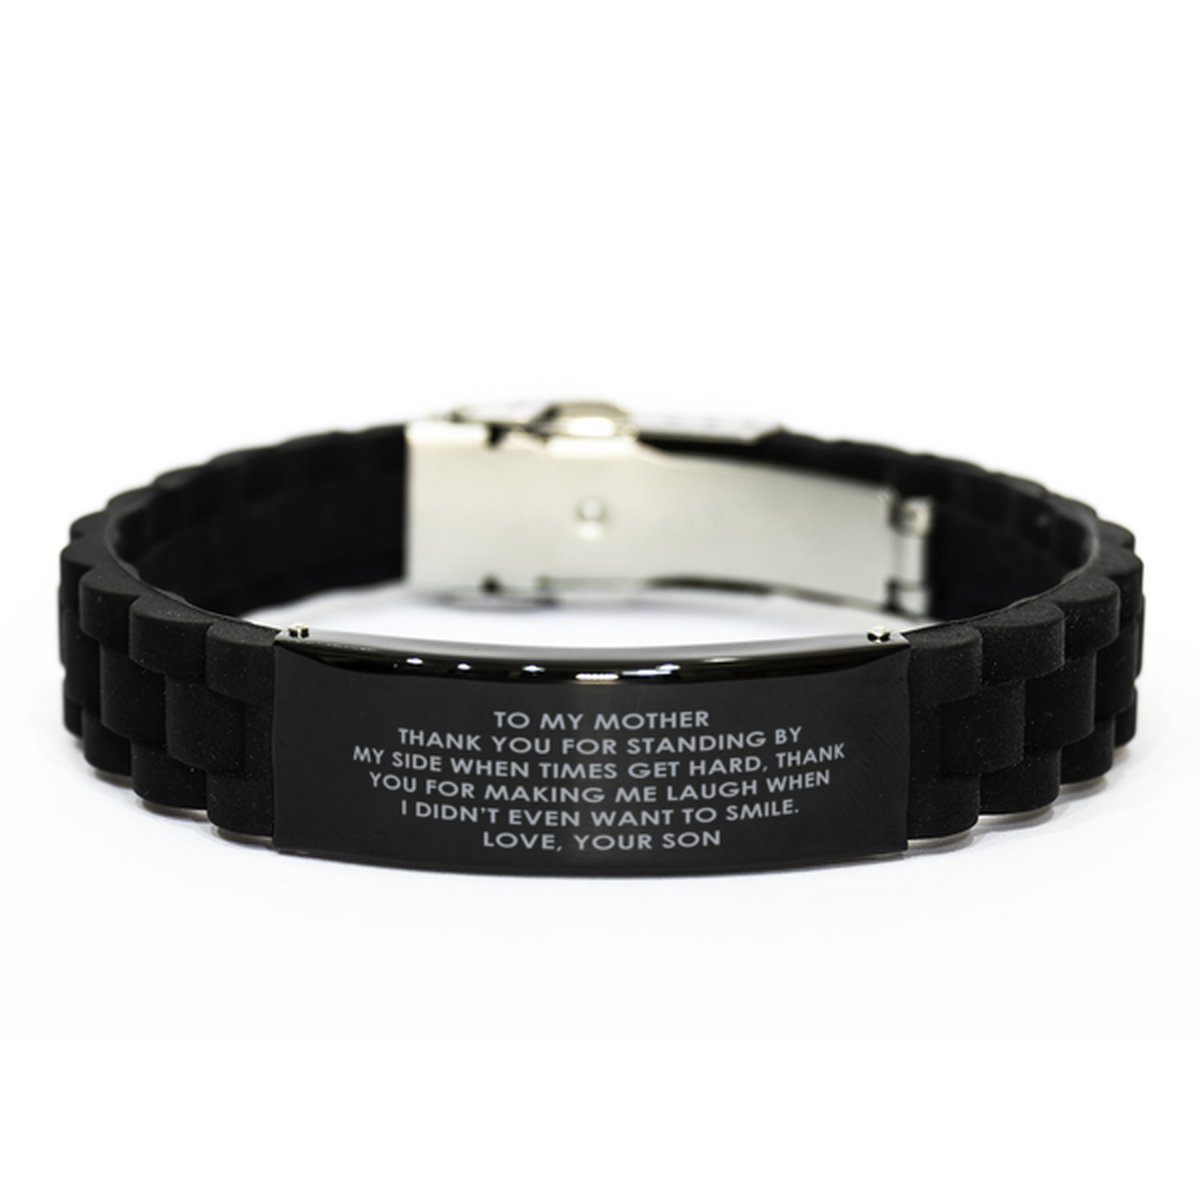 To My Mother  Black Bracelet, Thank You For Standing By My Side, Valentines Gifts For Mother From Son, Birthday Gifts For Women